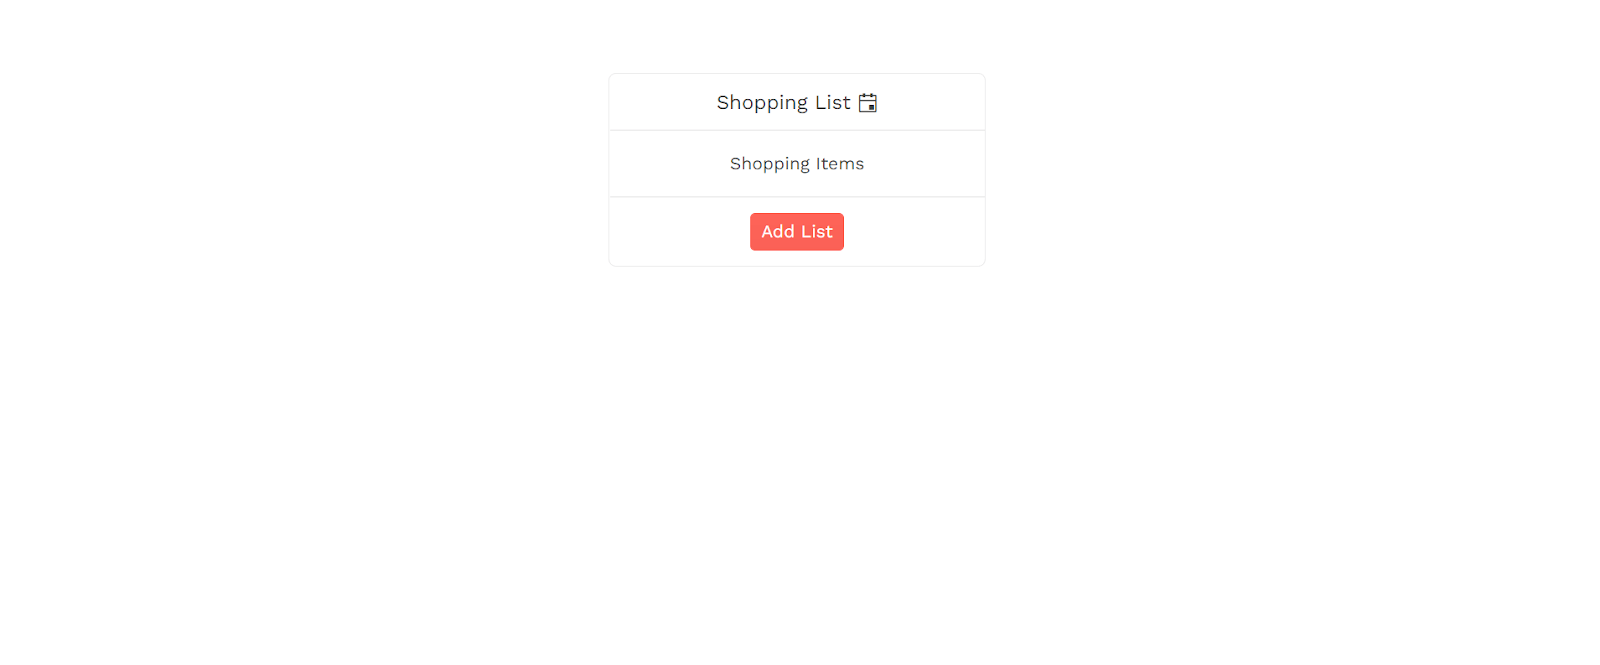 Shopping list, shopping items, and a button for add list